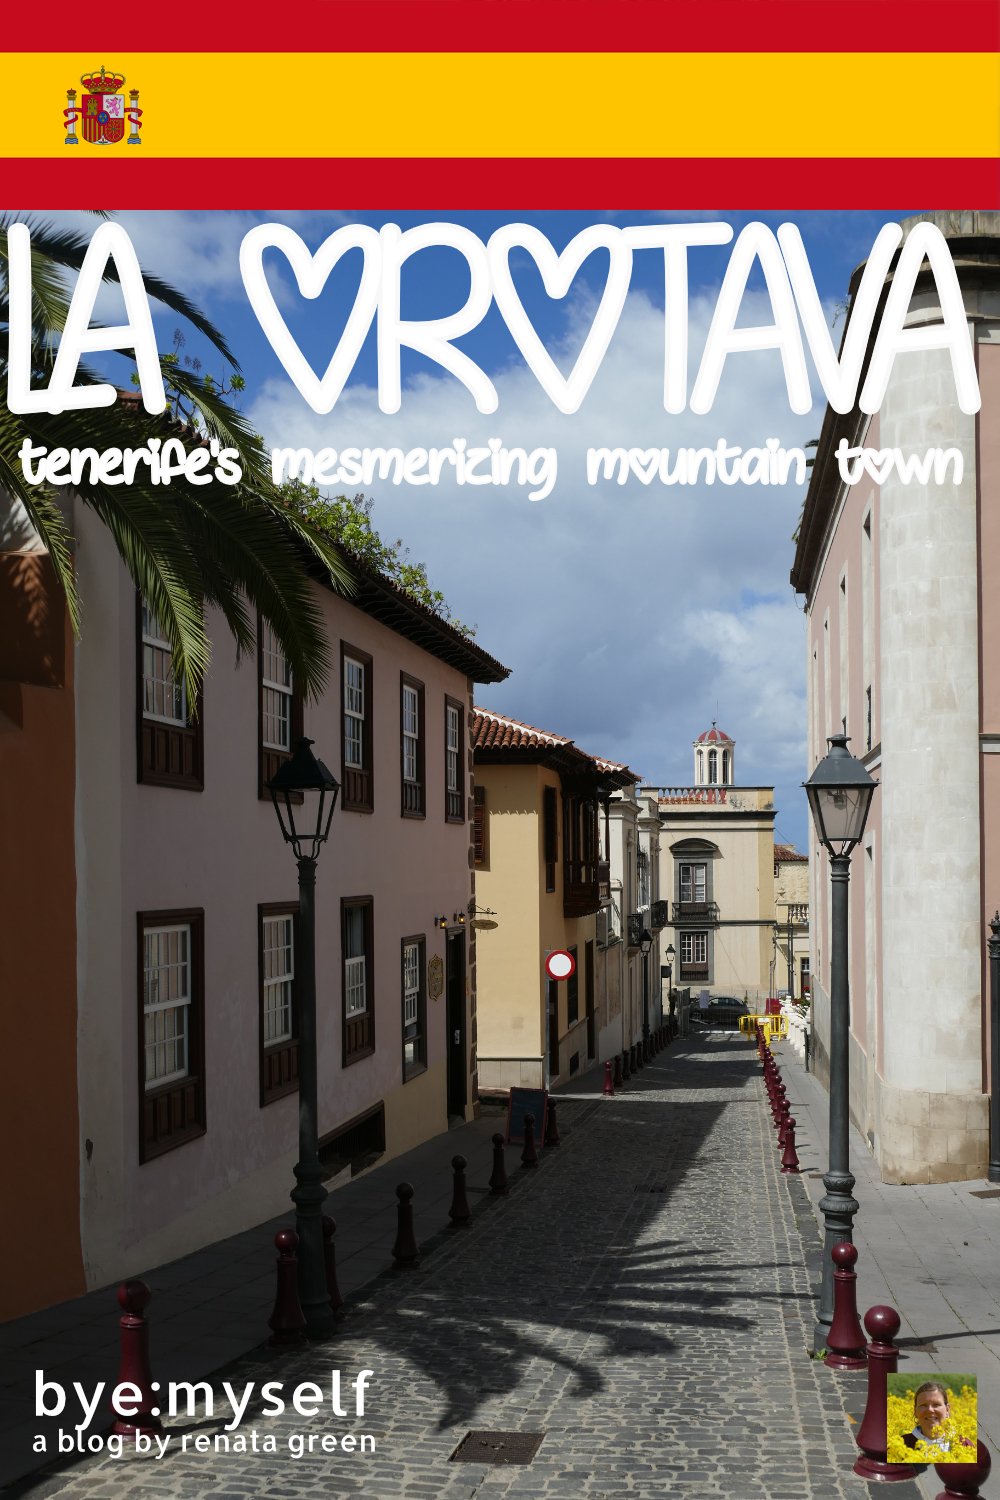 Pinnable Picture on the Post LA OROTAVA - a Guide to Tenerife's Mesmerizing Mountain Town